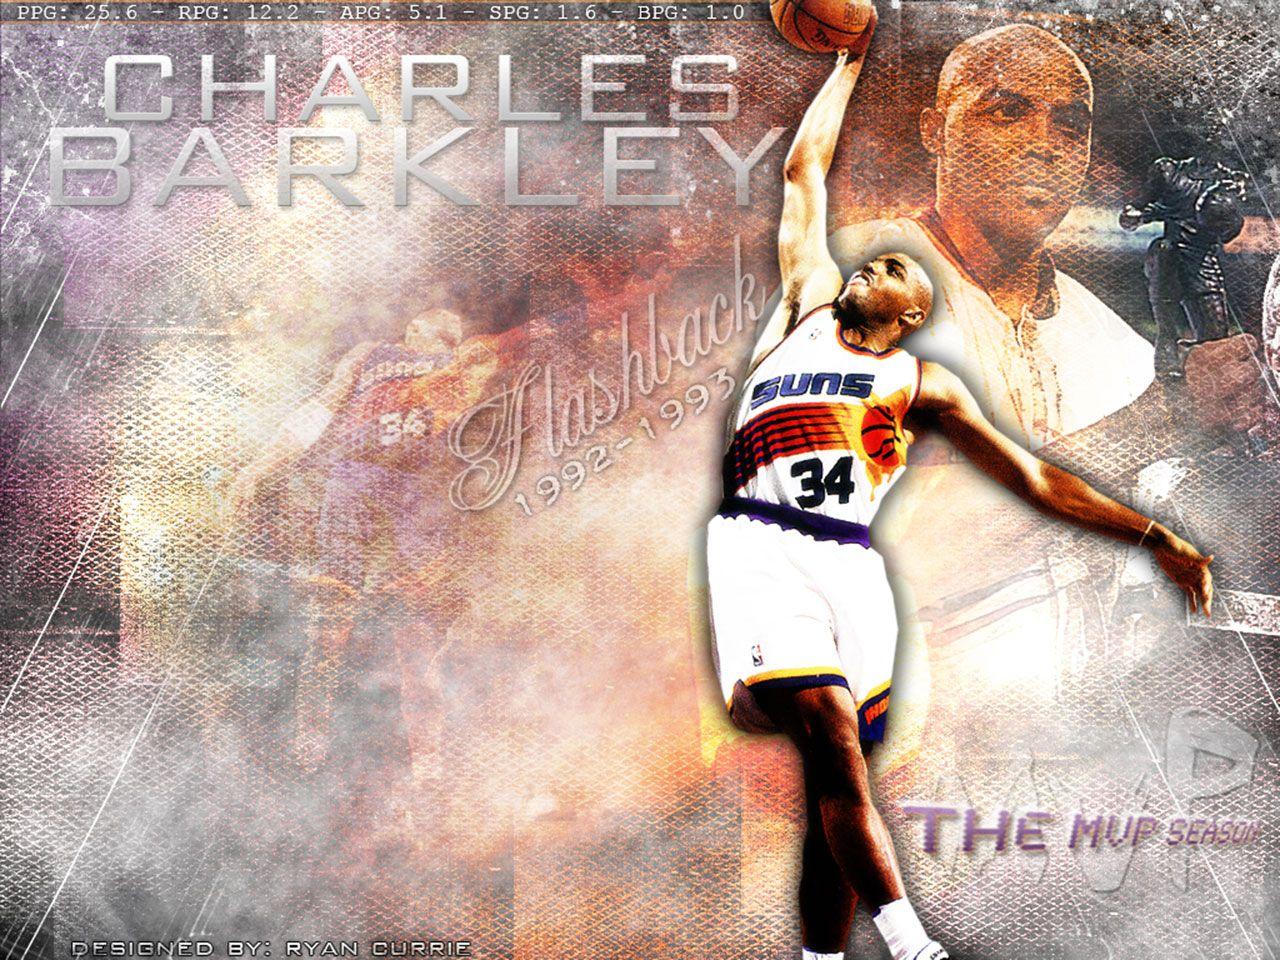 Charles Barkley Loved the overall arrangement of this photo The  overlapping of images is done nicely  Nba artwork Nba art Nba  basketball art